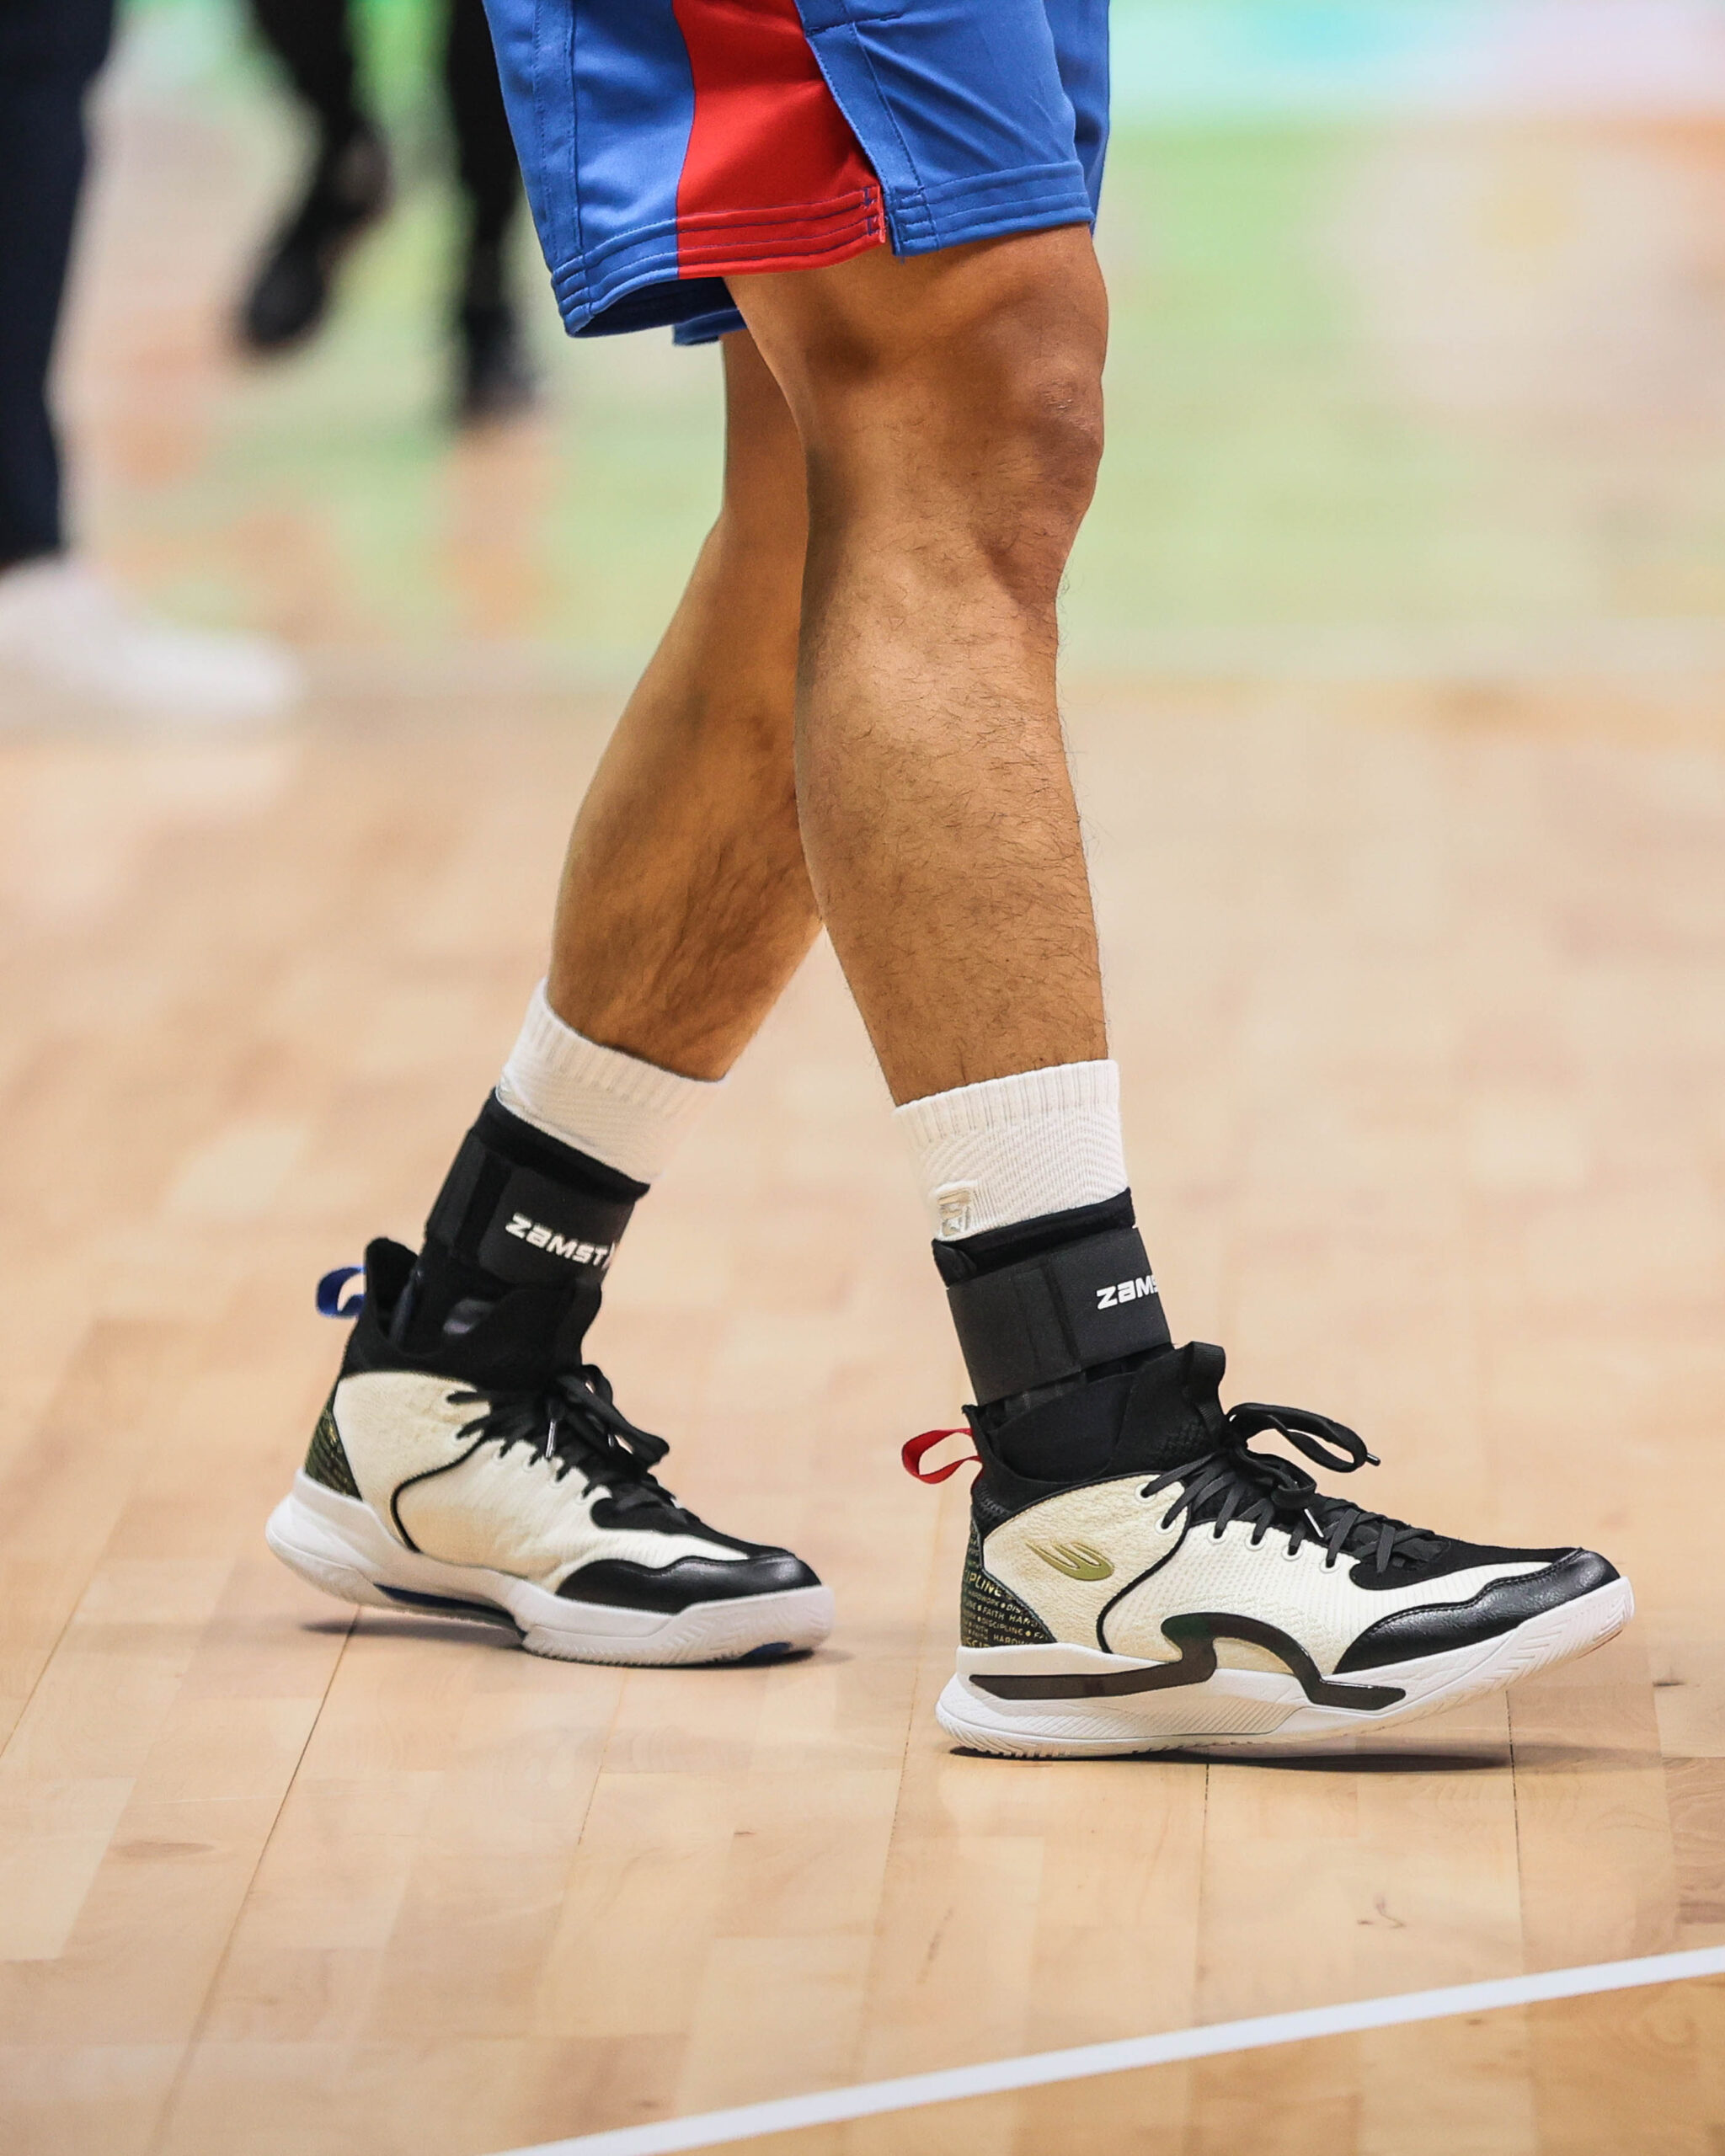 Gilas Pilipinas Scottie Thompson's shoes at the 2023 FIBA World Cup: World Balance ST1 Reign